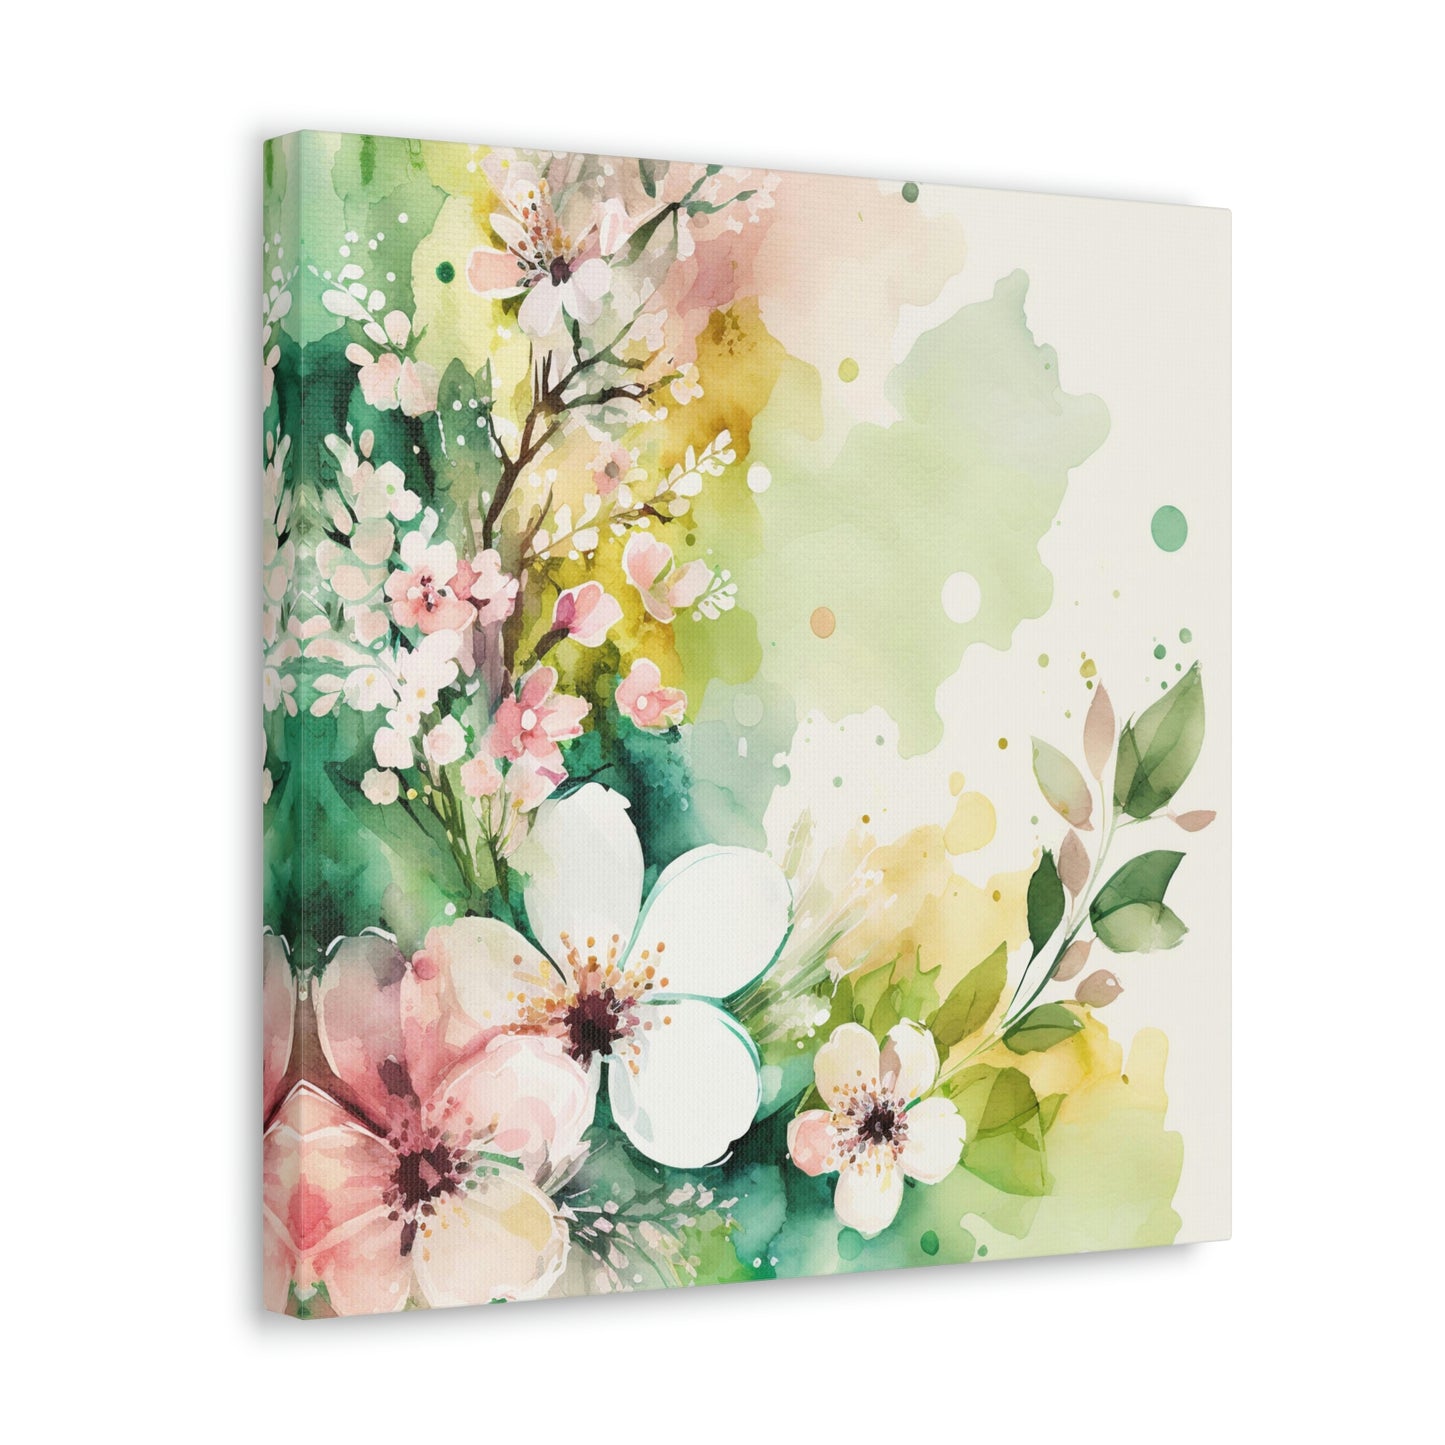 green and pink floral canvas wall art print, watercolor floral wall decor